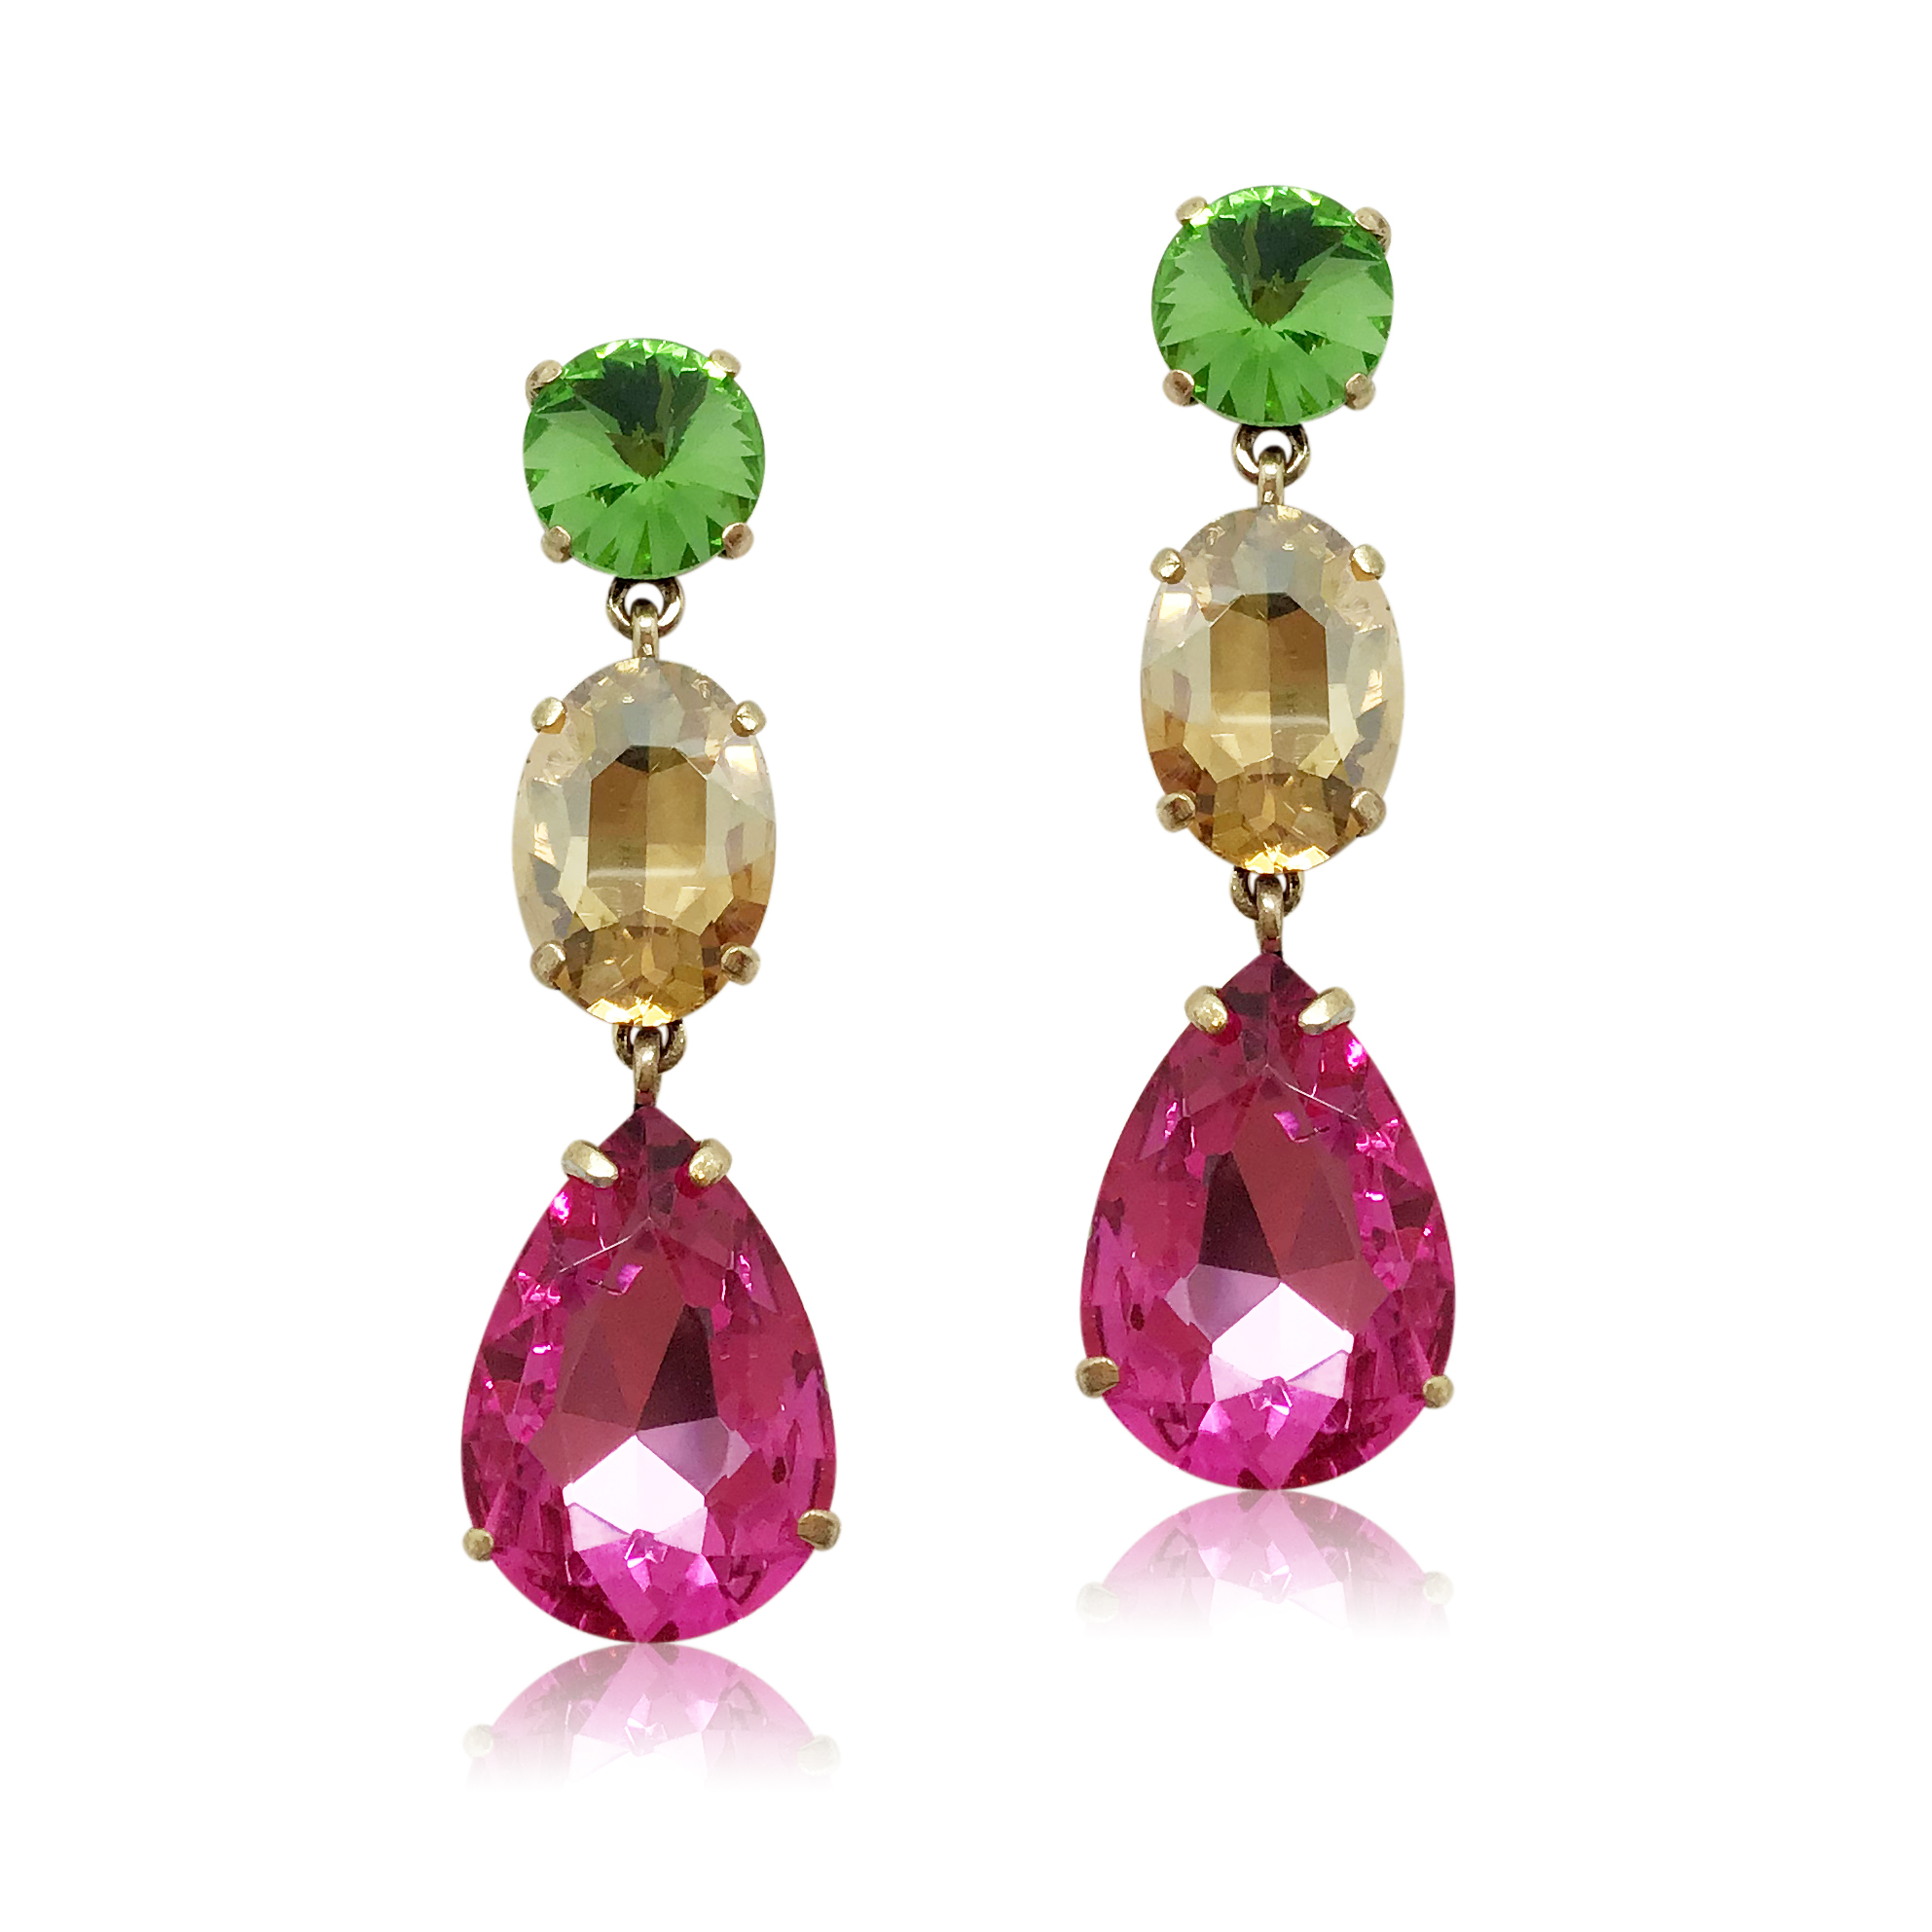 Green Fashion Statement Earring |Mariah|Jeanette Maree|Shop Online Now